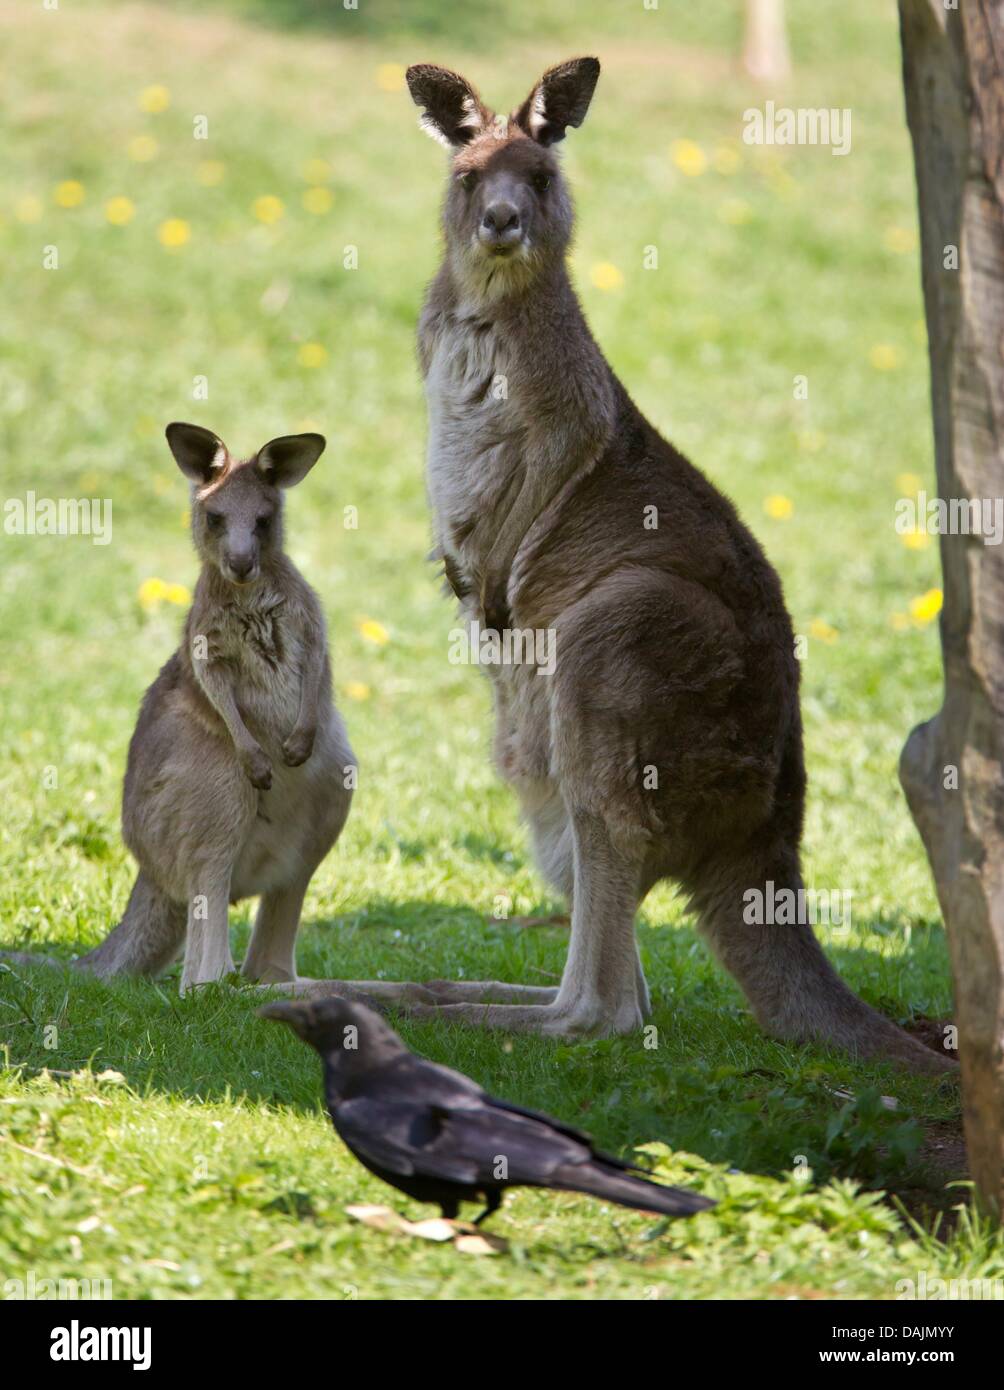 Two red kangaroos view a raven in the Zoo of Erfurt, Germany, 19 April 2011. During the annual animal inventory all animals are counted and partly measured. Photo: Michael Reichel Stock Photo